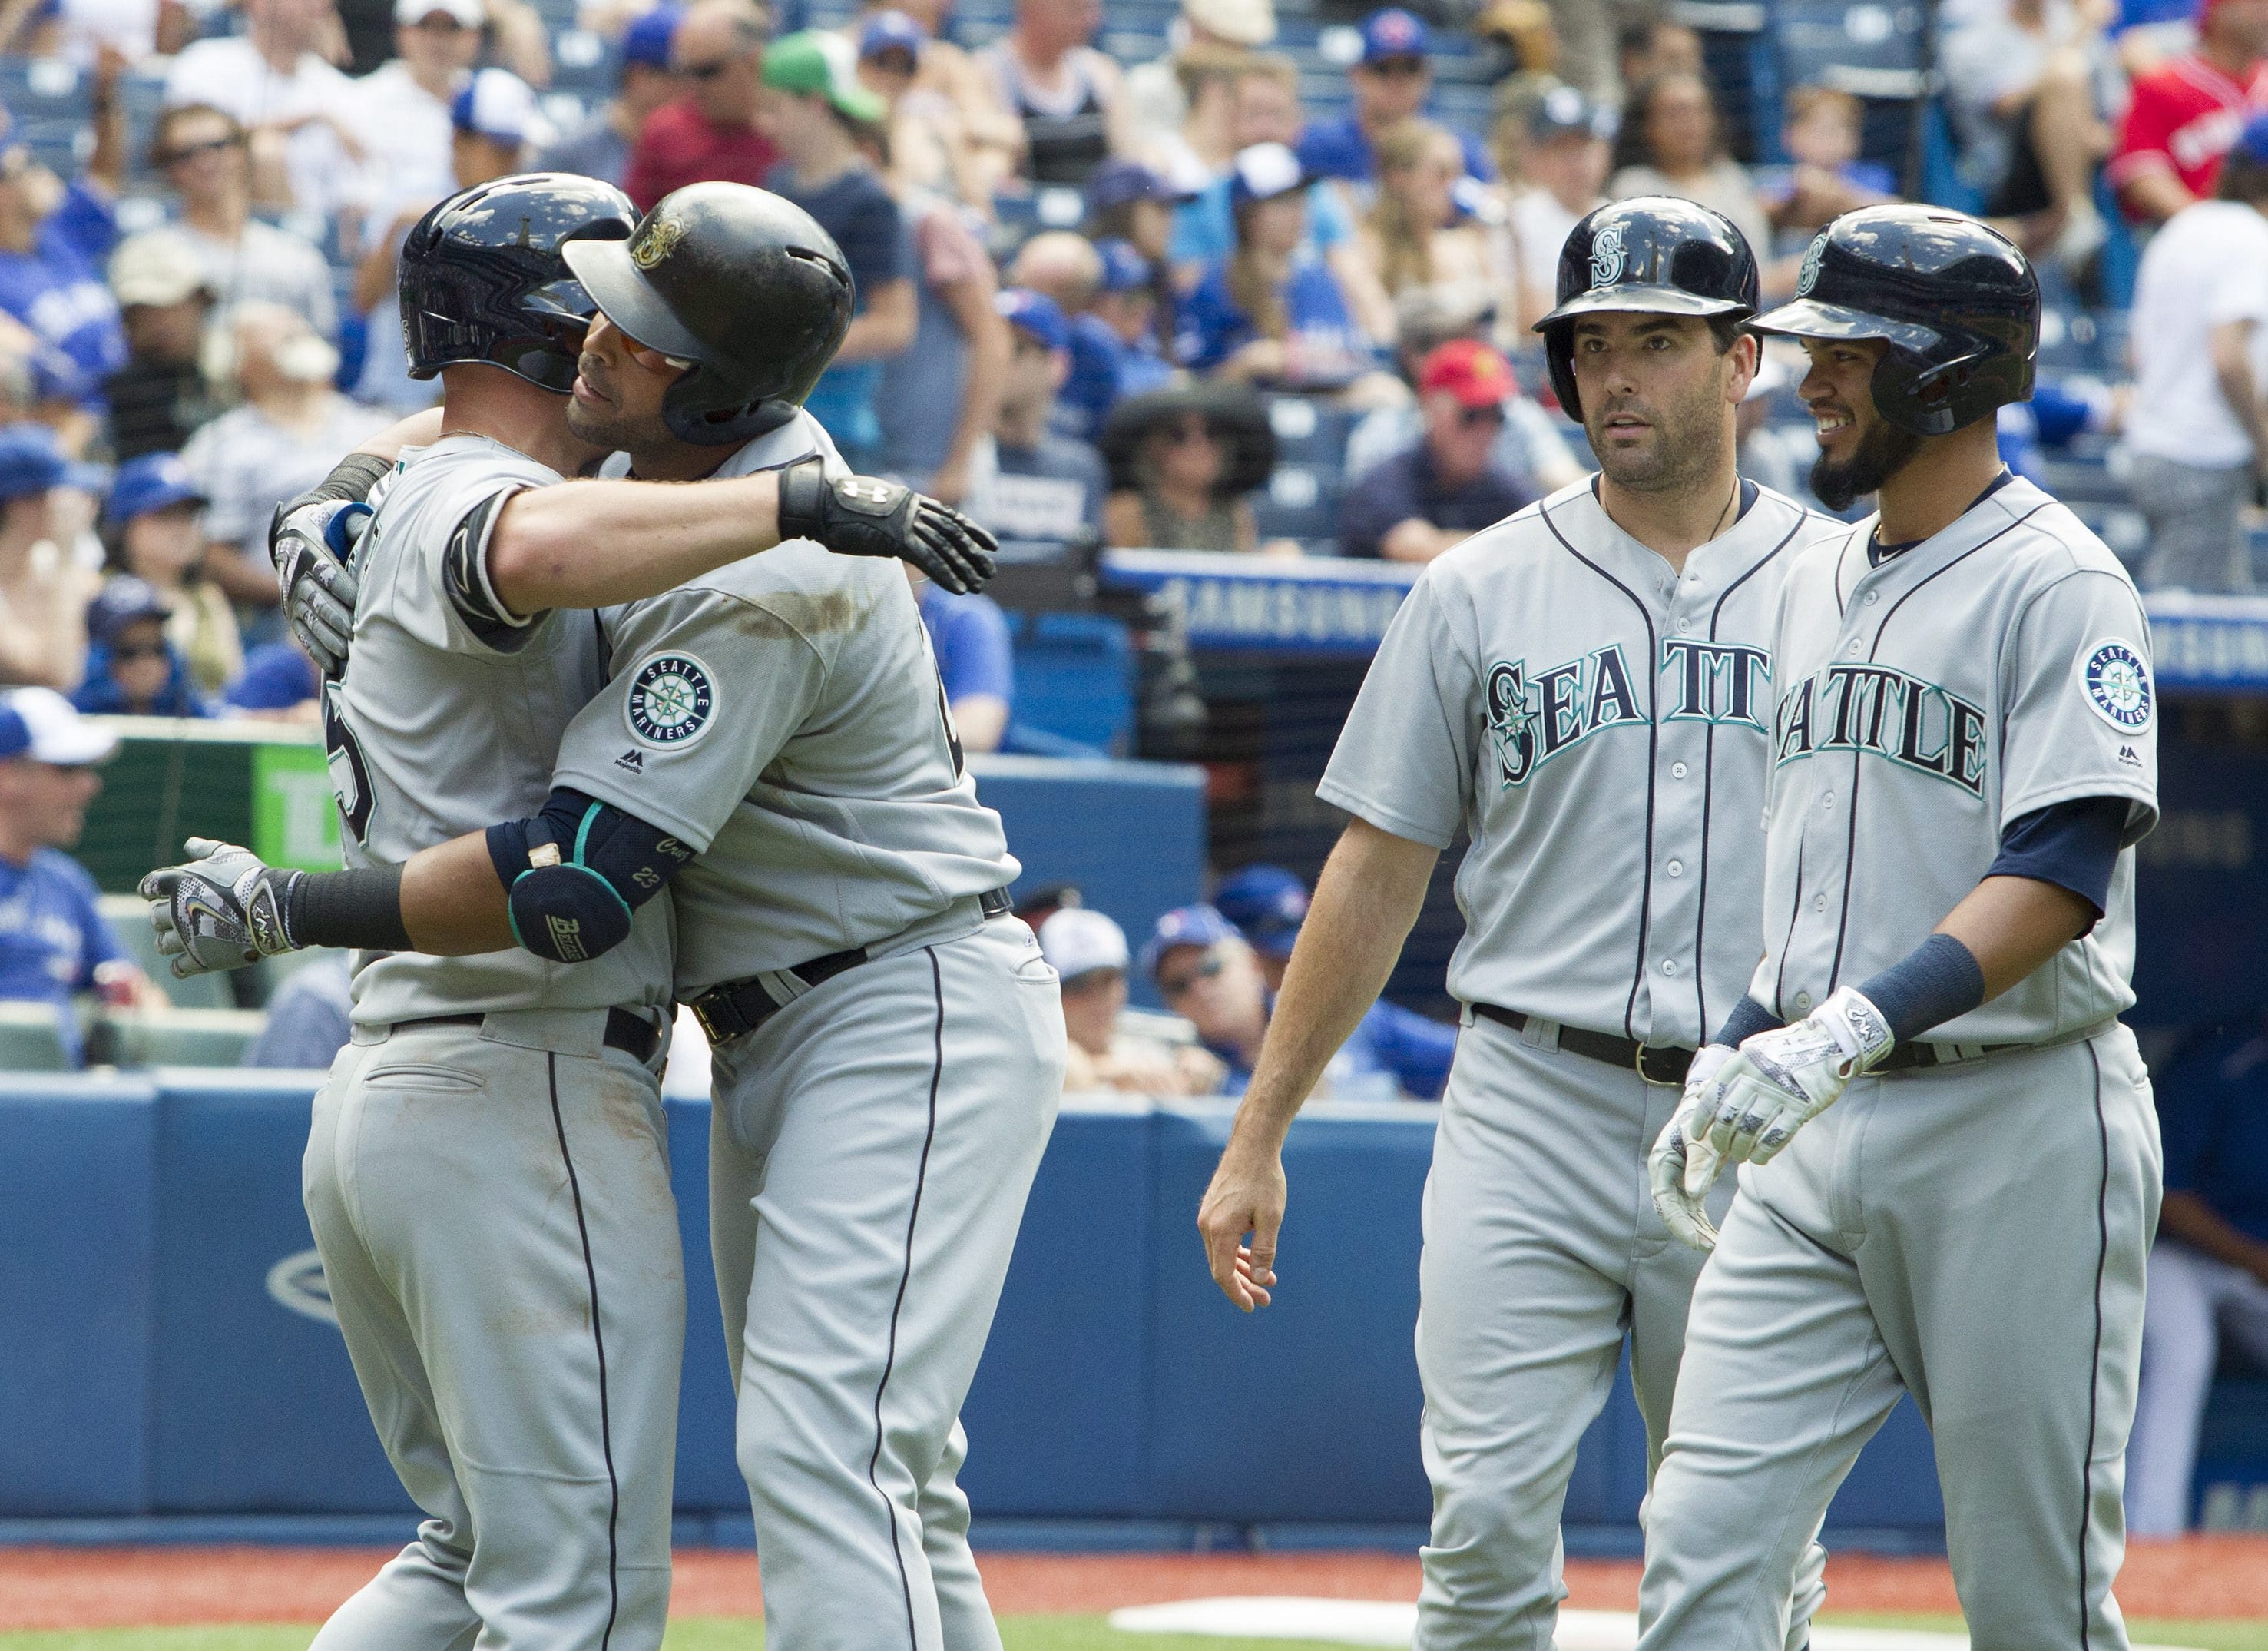 Seattle Mariners' Nelson Cruz, second from left, is embraced by teammate Kyle Seager after hitting a three-run home run in eighth-inning baseball game action against the Toronto Blue Jays in Toronto, Saturday, July 23, 2016.